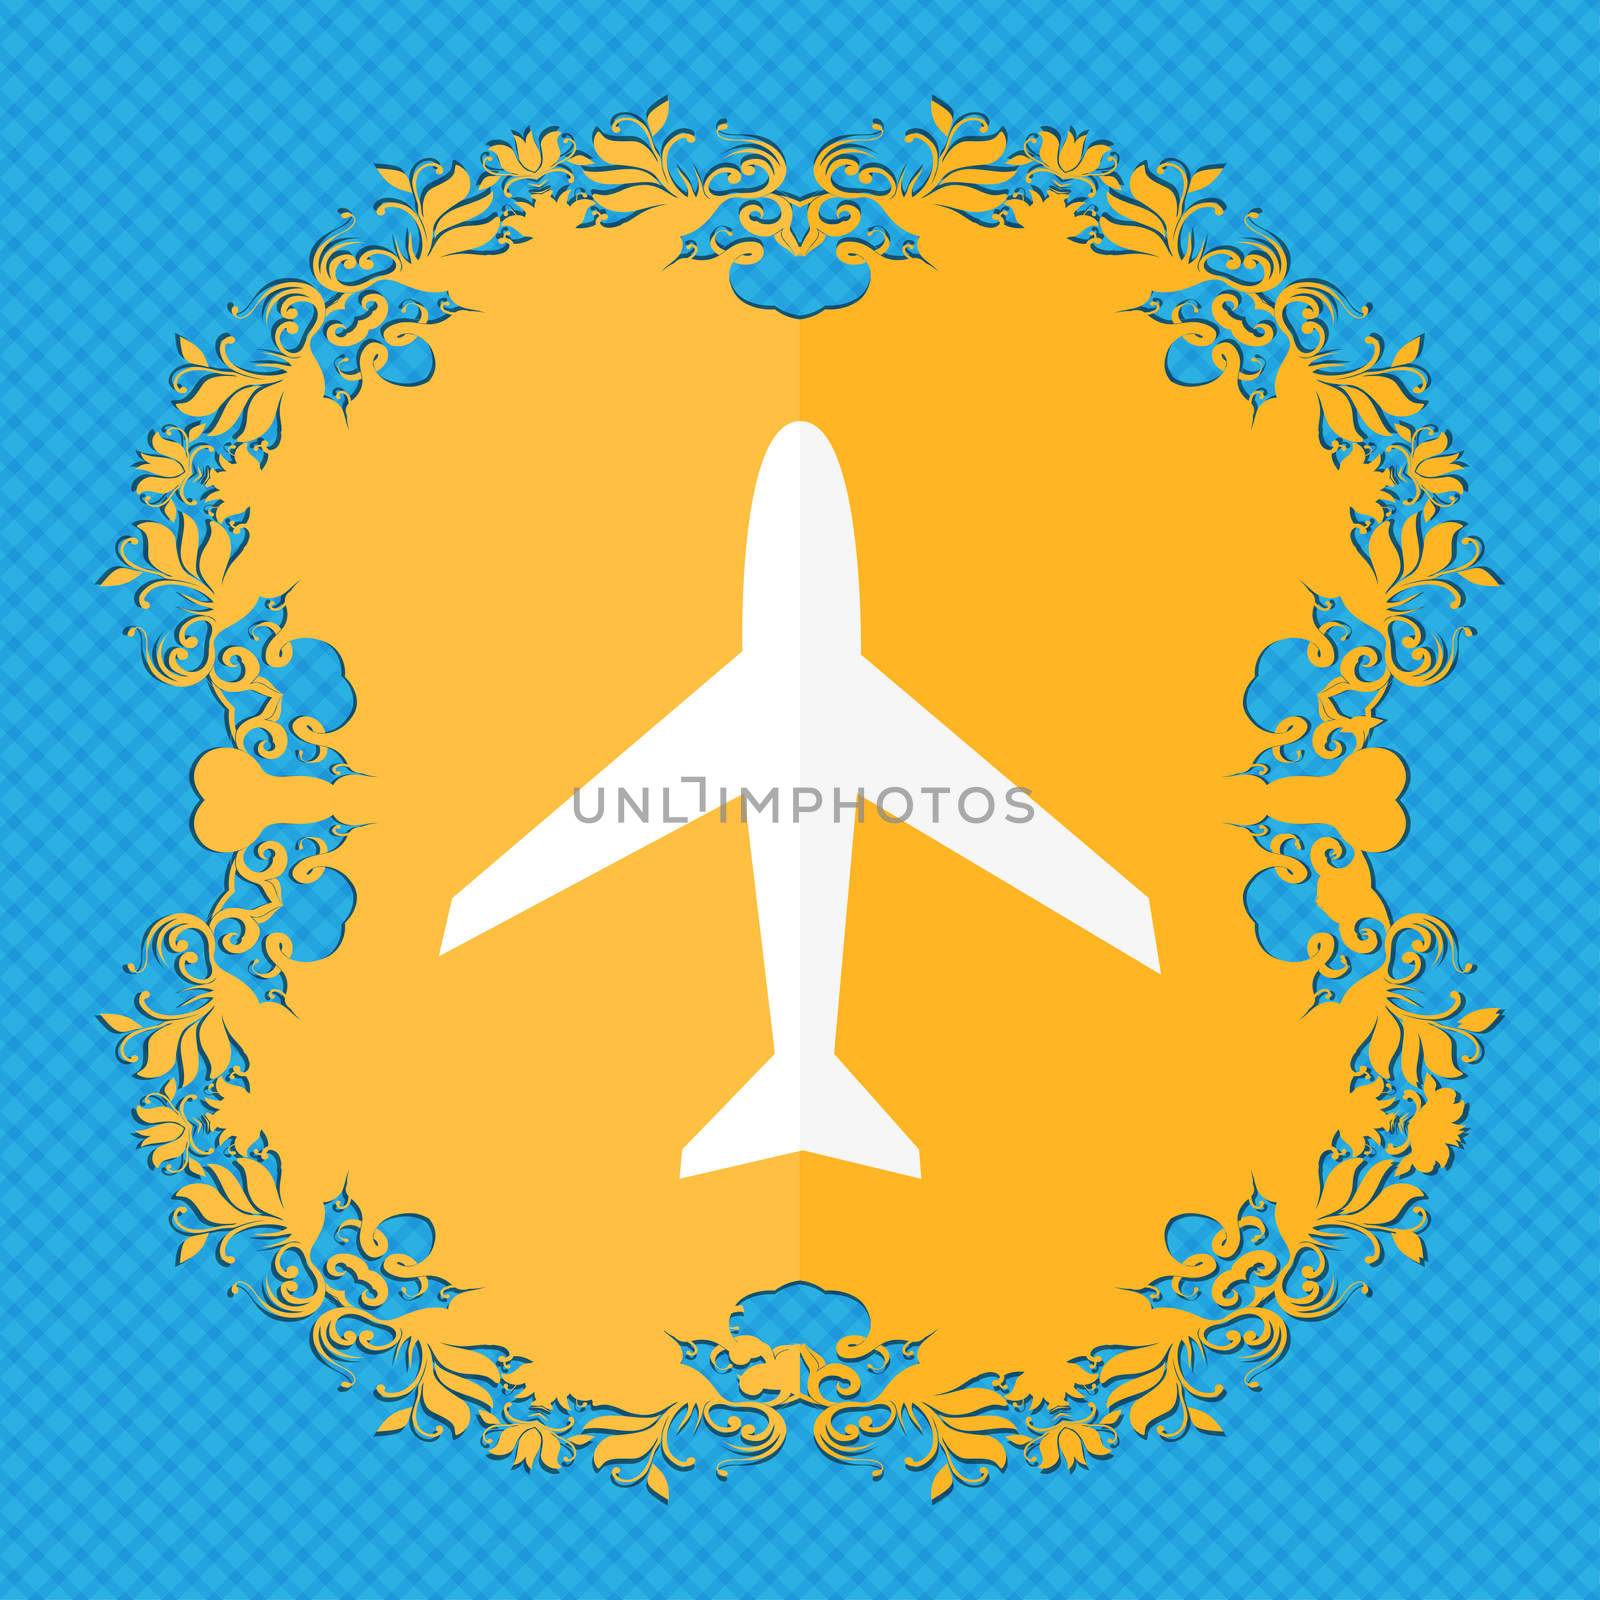 Airplane sign. Plane symbol. Travel icon. Flight flat label. Floral flat design on a blue abstract background with place for your text. illustration